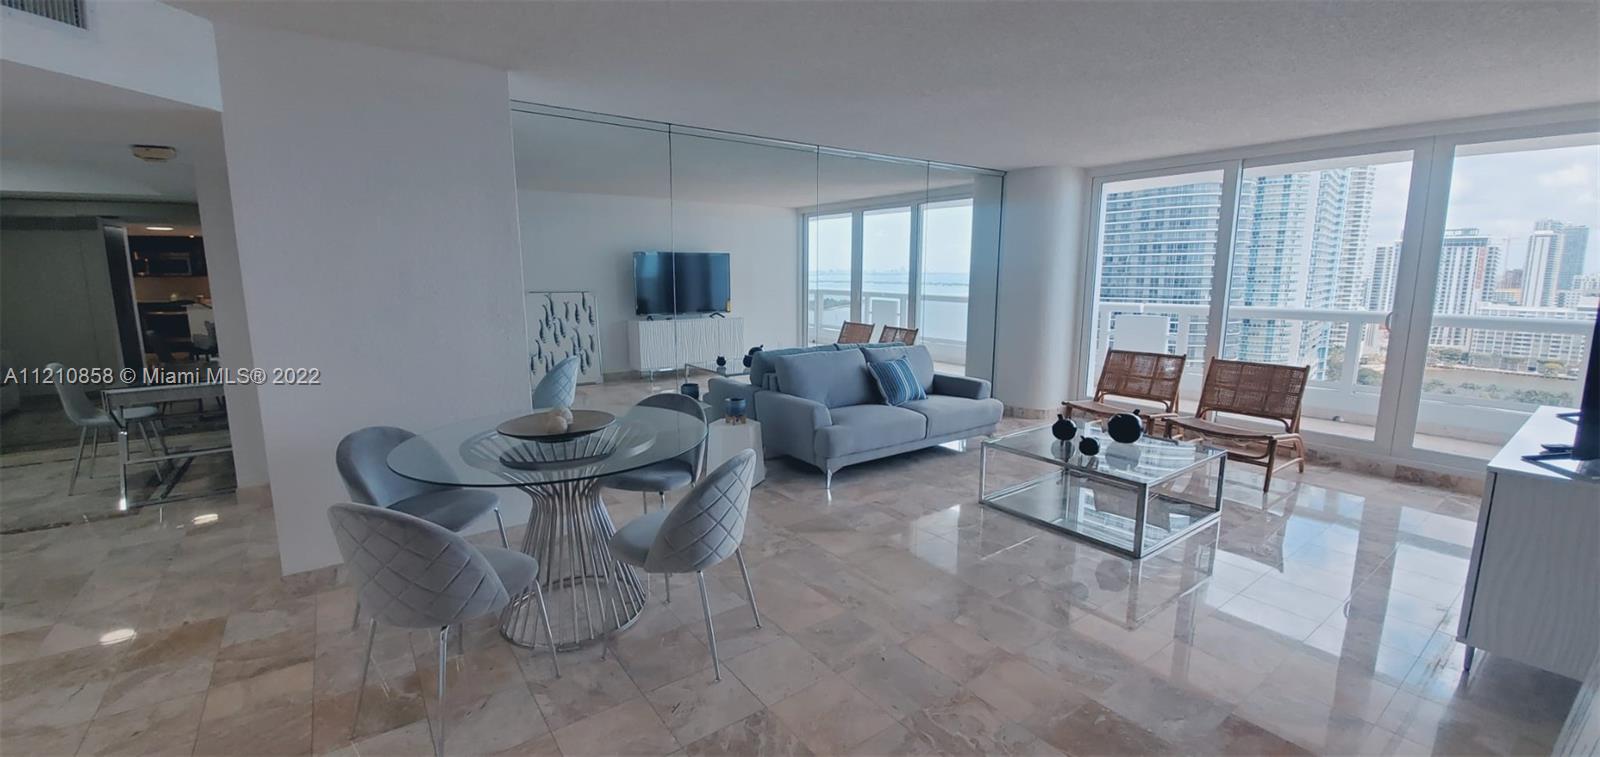 Newly Furnished 2 Bed + Den / 2 Bath. Freshly painted, and beautifully furnished! The price is firm. No subleasing allowed.  1st month + 2 Month Security Required. Stunning views from Biscayne Bay and Miami Beach. Excellent location in the heart of Miami, just minutes from Miami Beach, Brickell, Midtown, Wynwood, and Miami International Airport. Washer & Dryer inside the unit. Building offers retail shops that include over 5 restaurants, pharmacy, beauty parlor and more. Located next to the waterfront Margaret Pace Park with tons of green space.